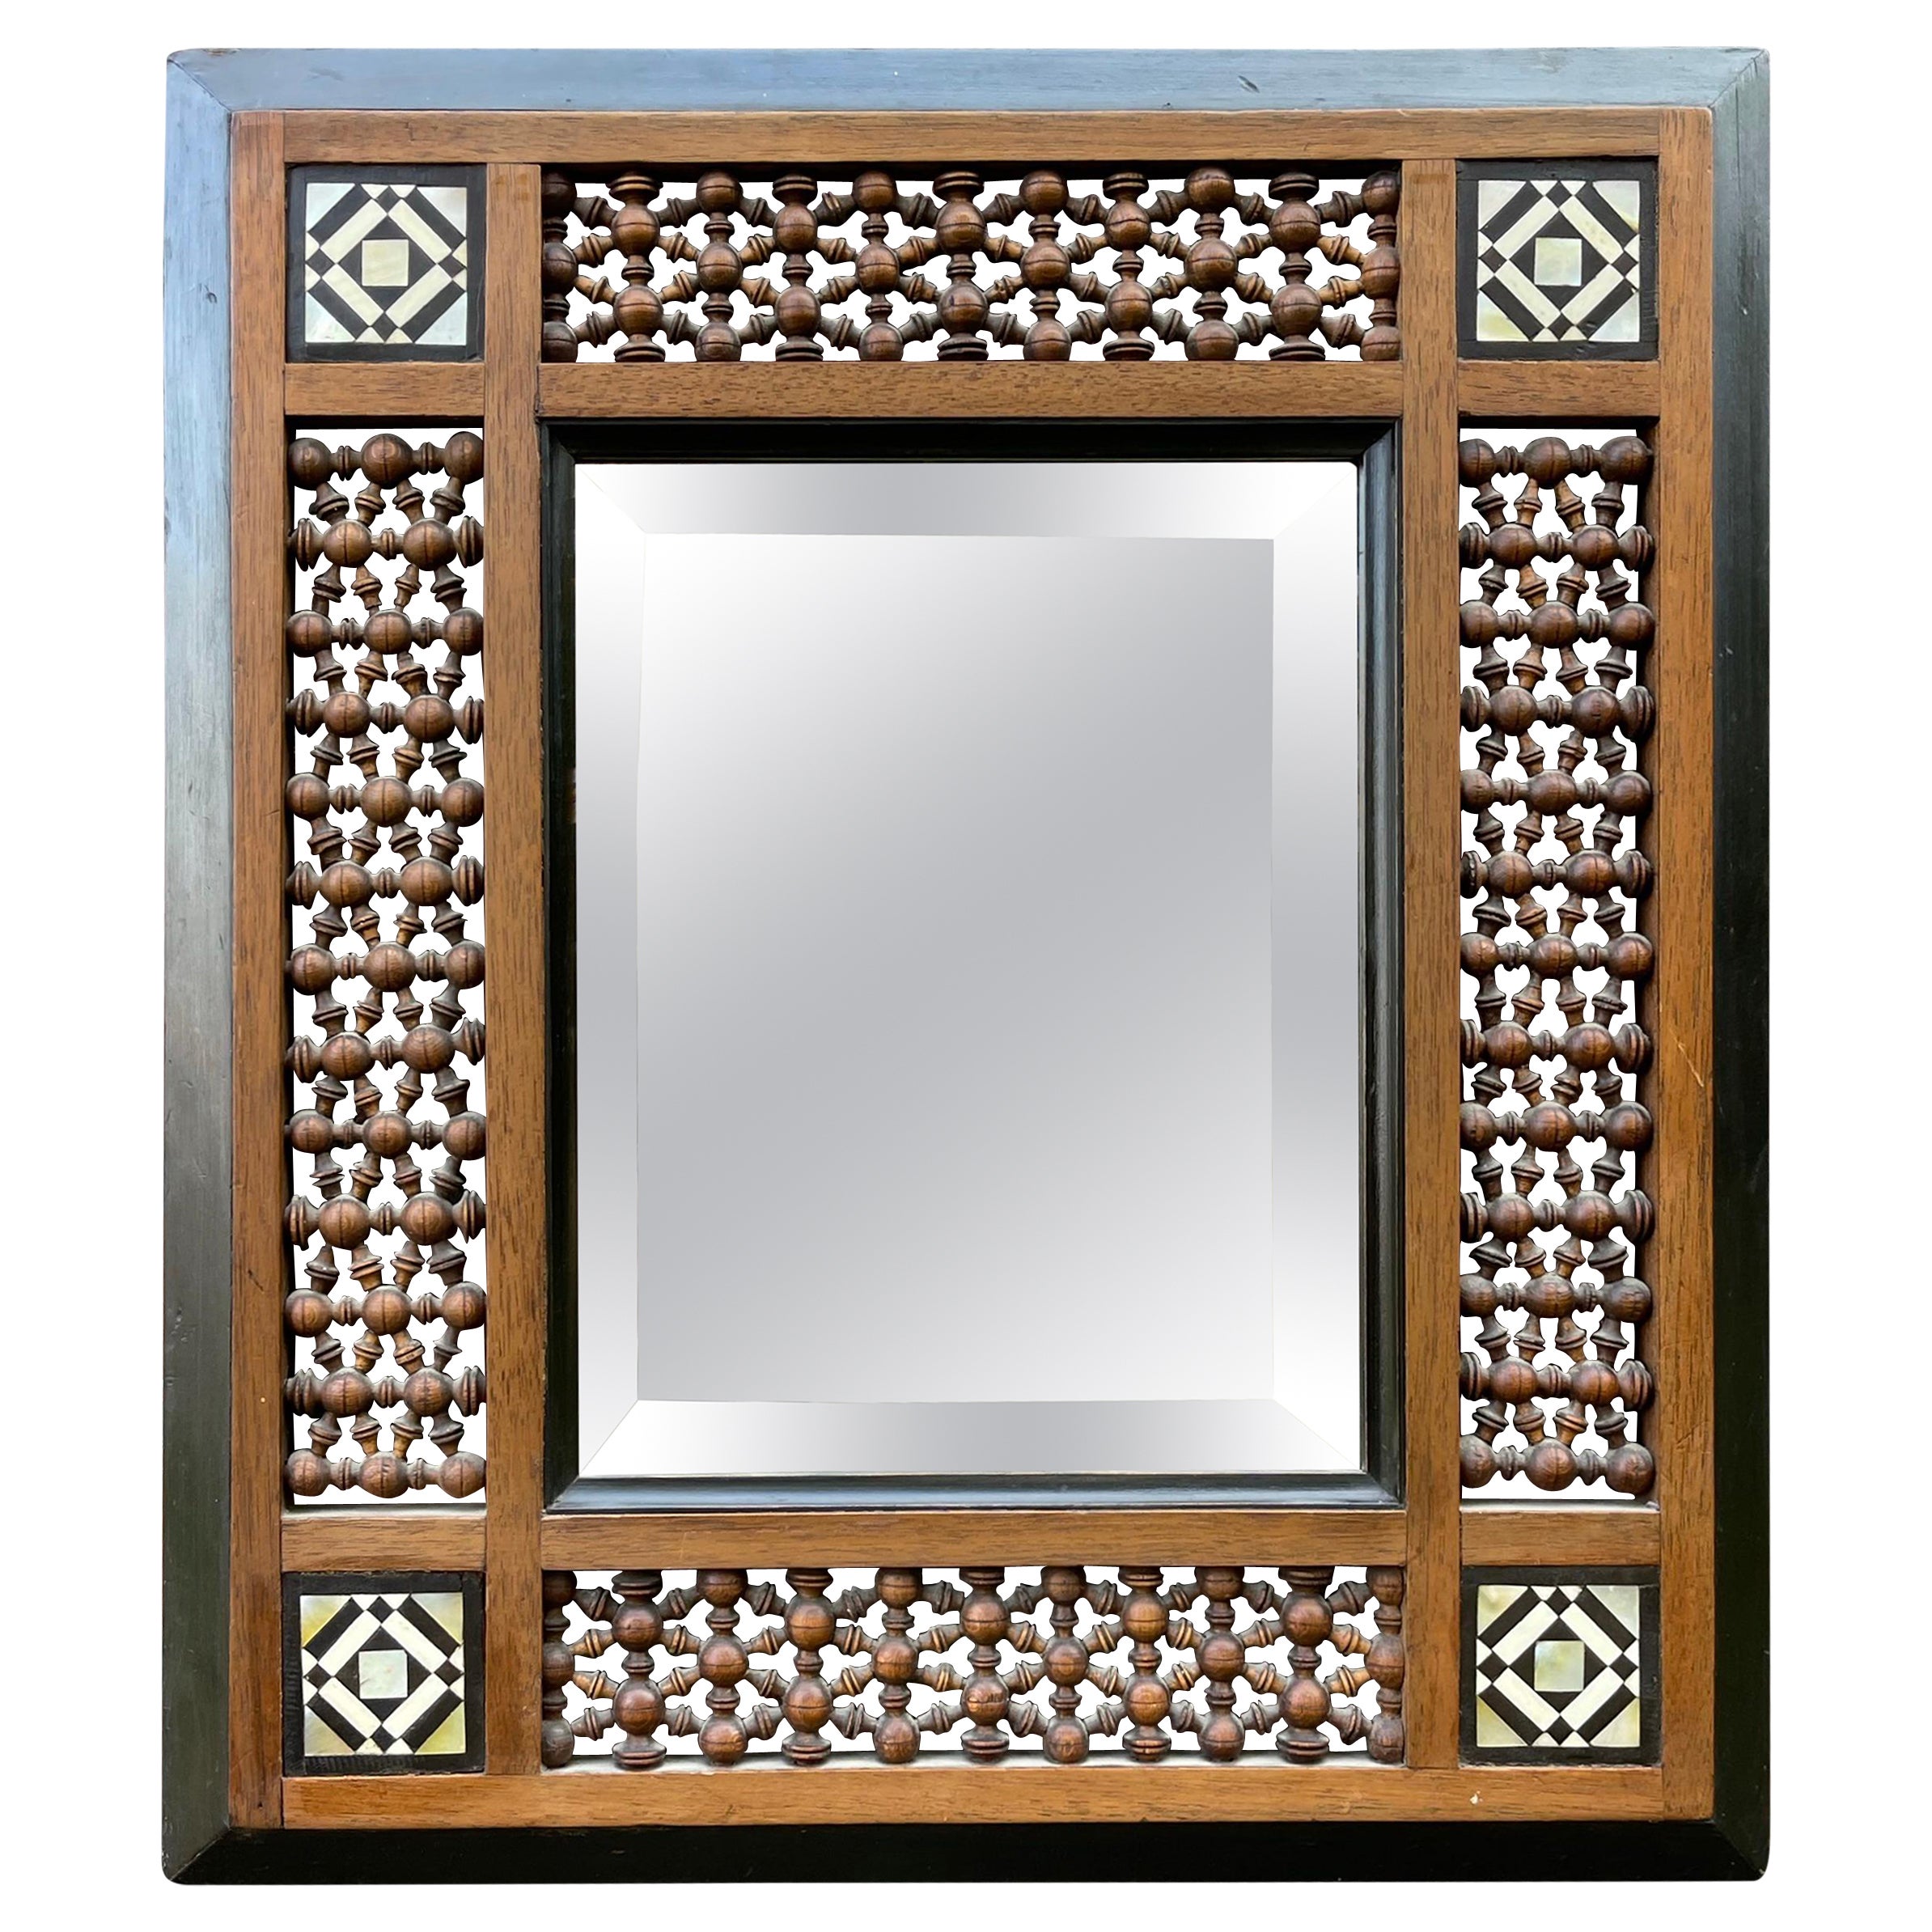 Stunning Spanish Antique Wooden Picture Frame / Mirror, Inlaid and Turned Motifs